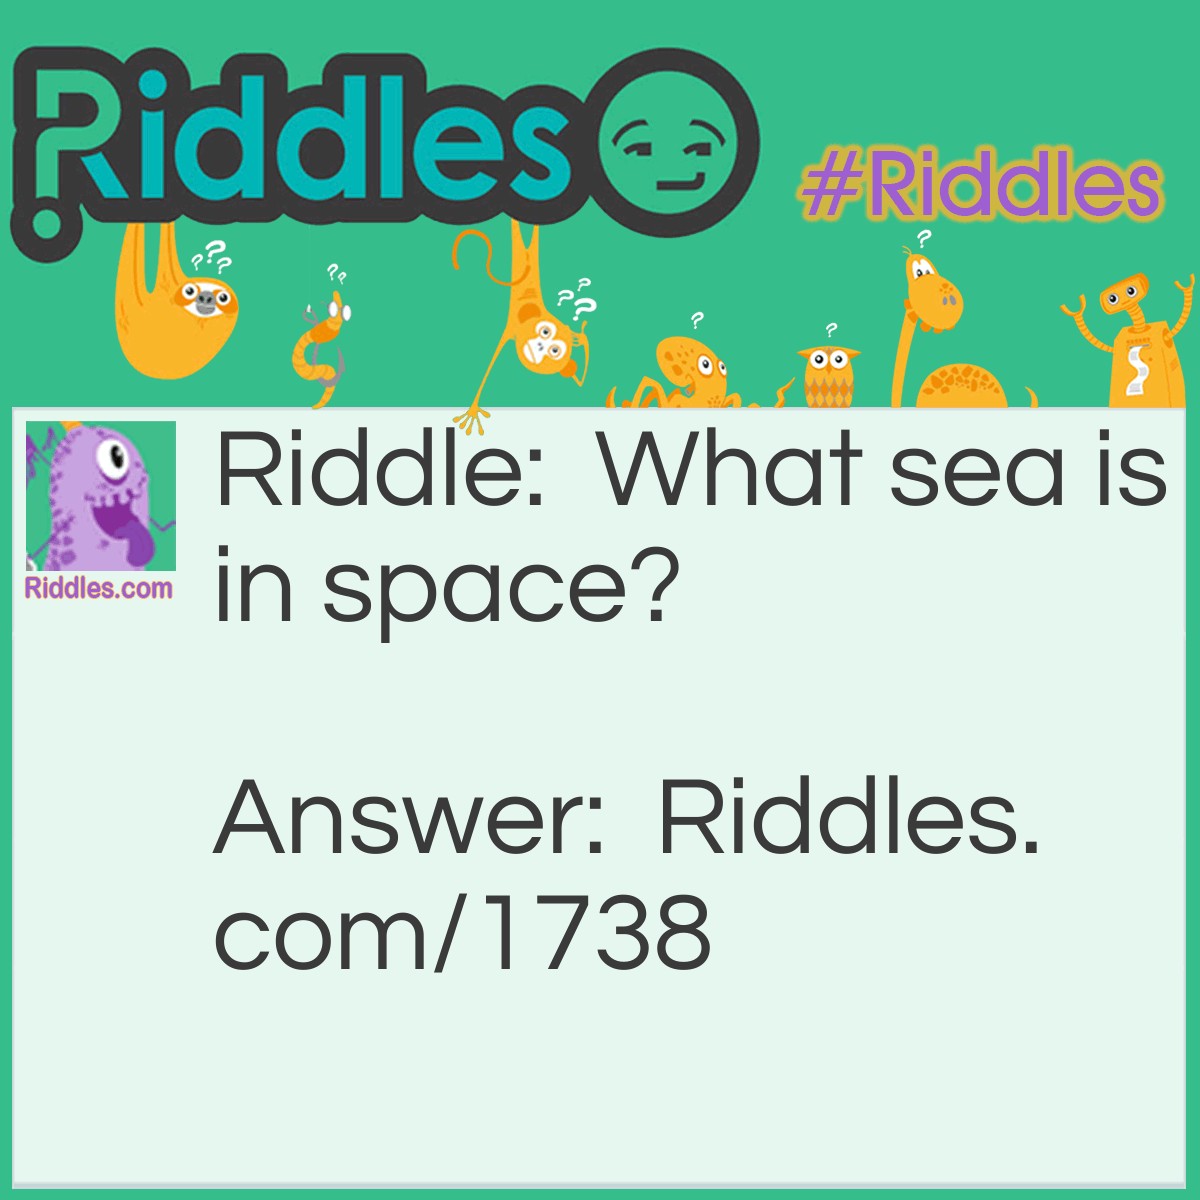 Riddle: What sea is in space? Answer: The galax-sea